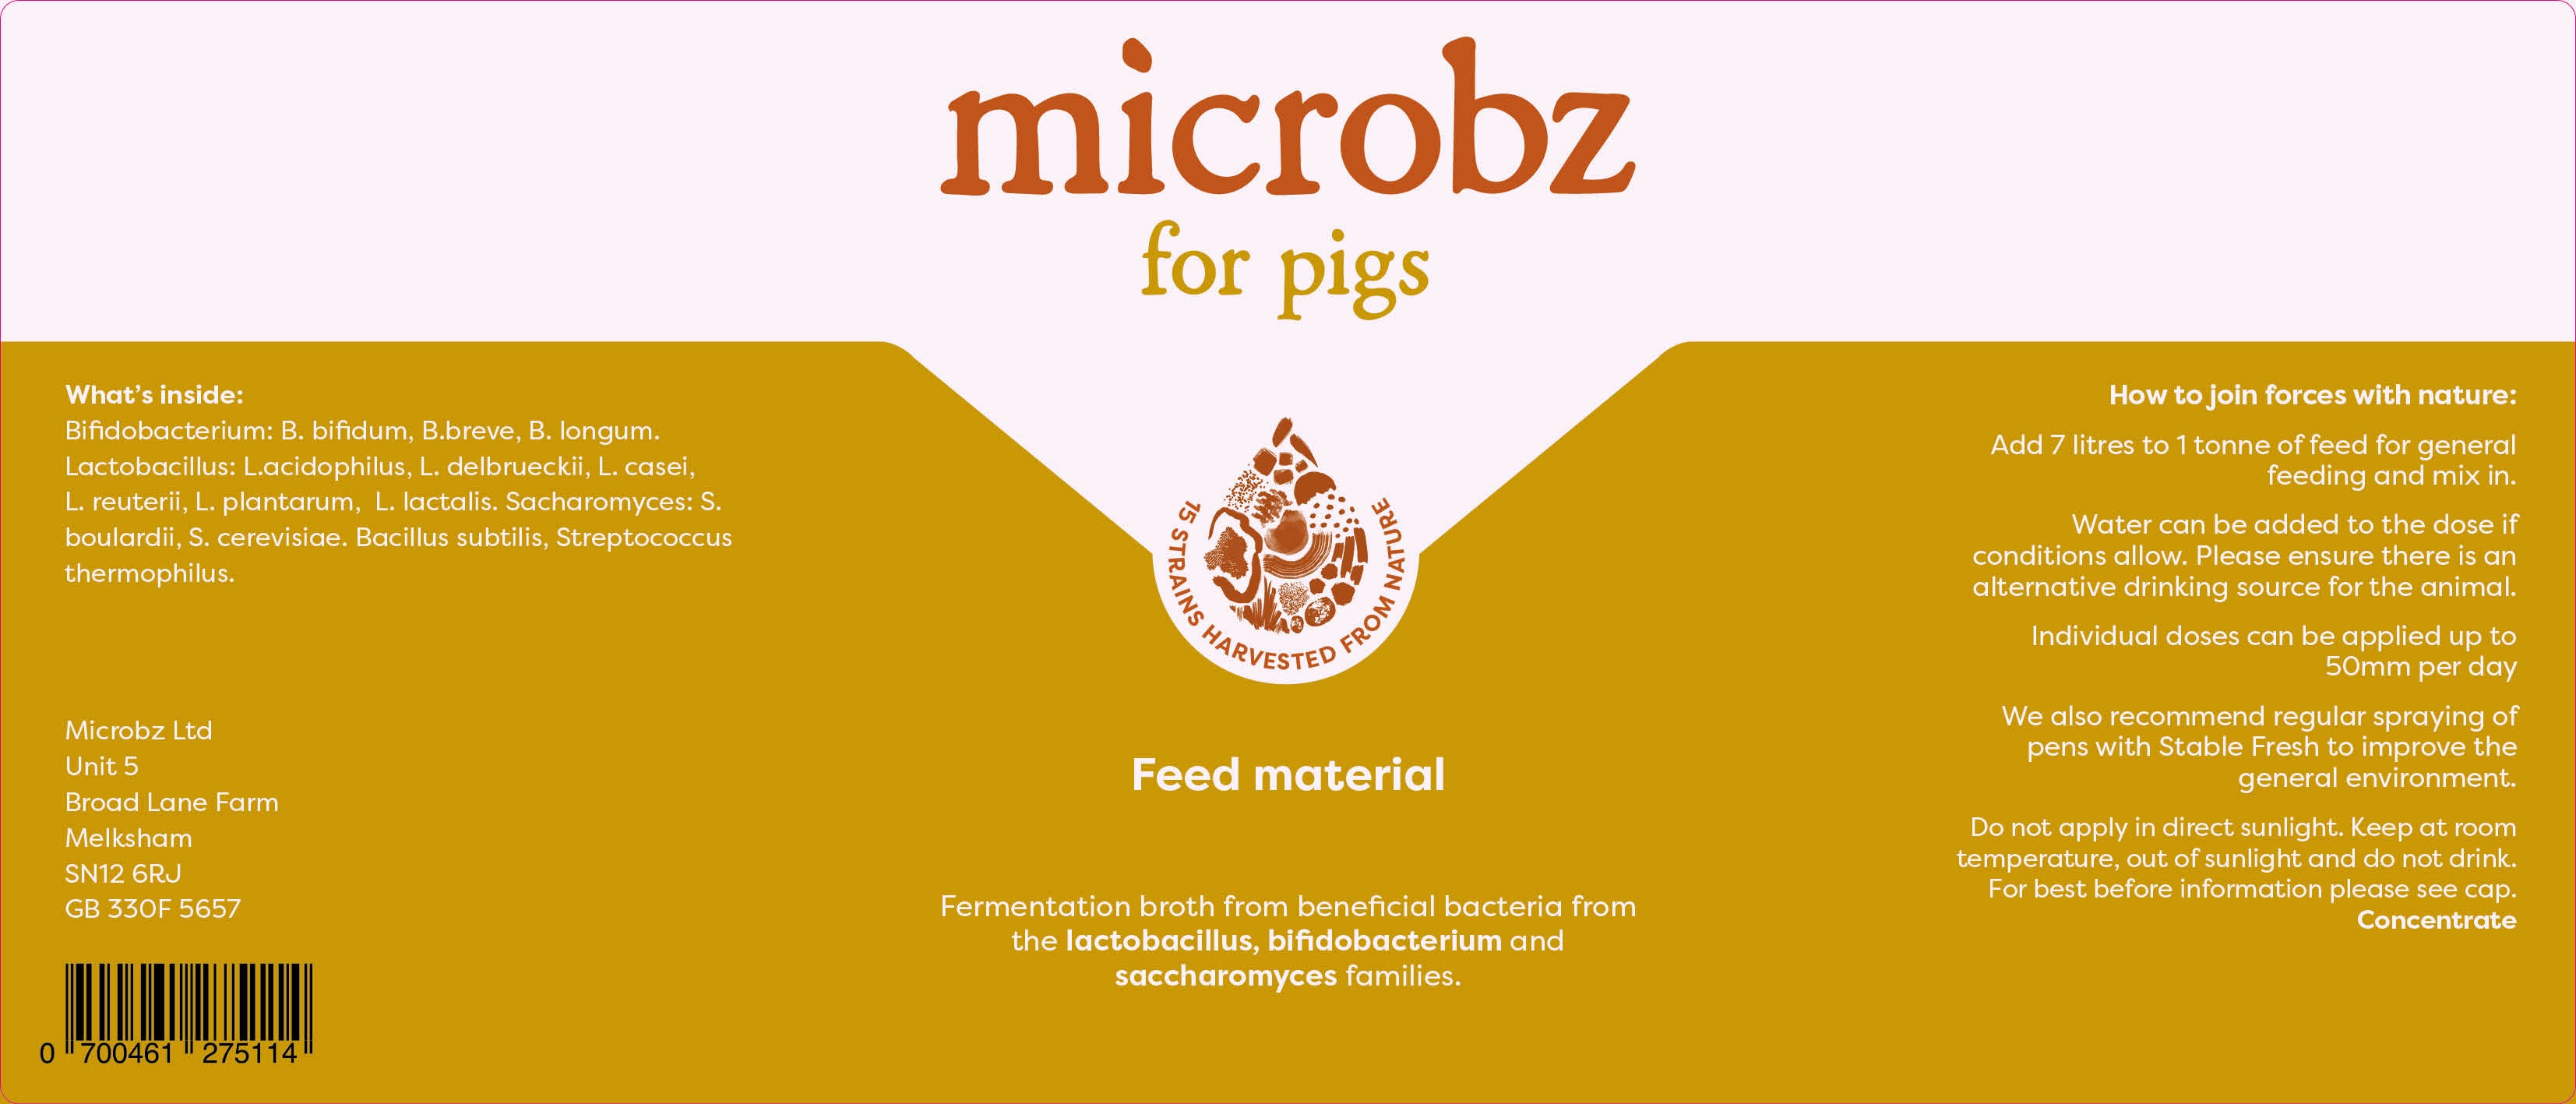 microbz for pigs label